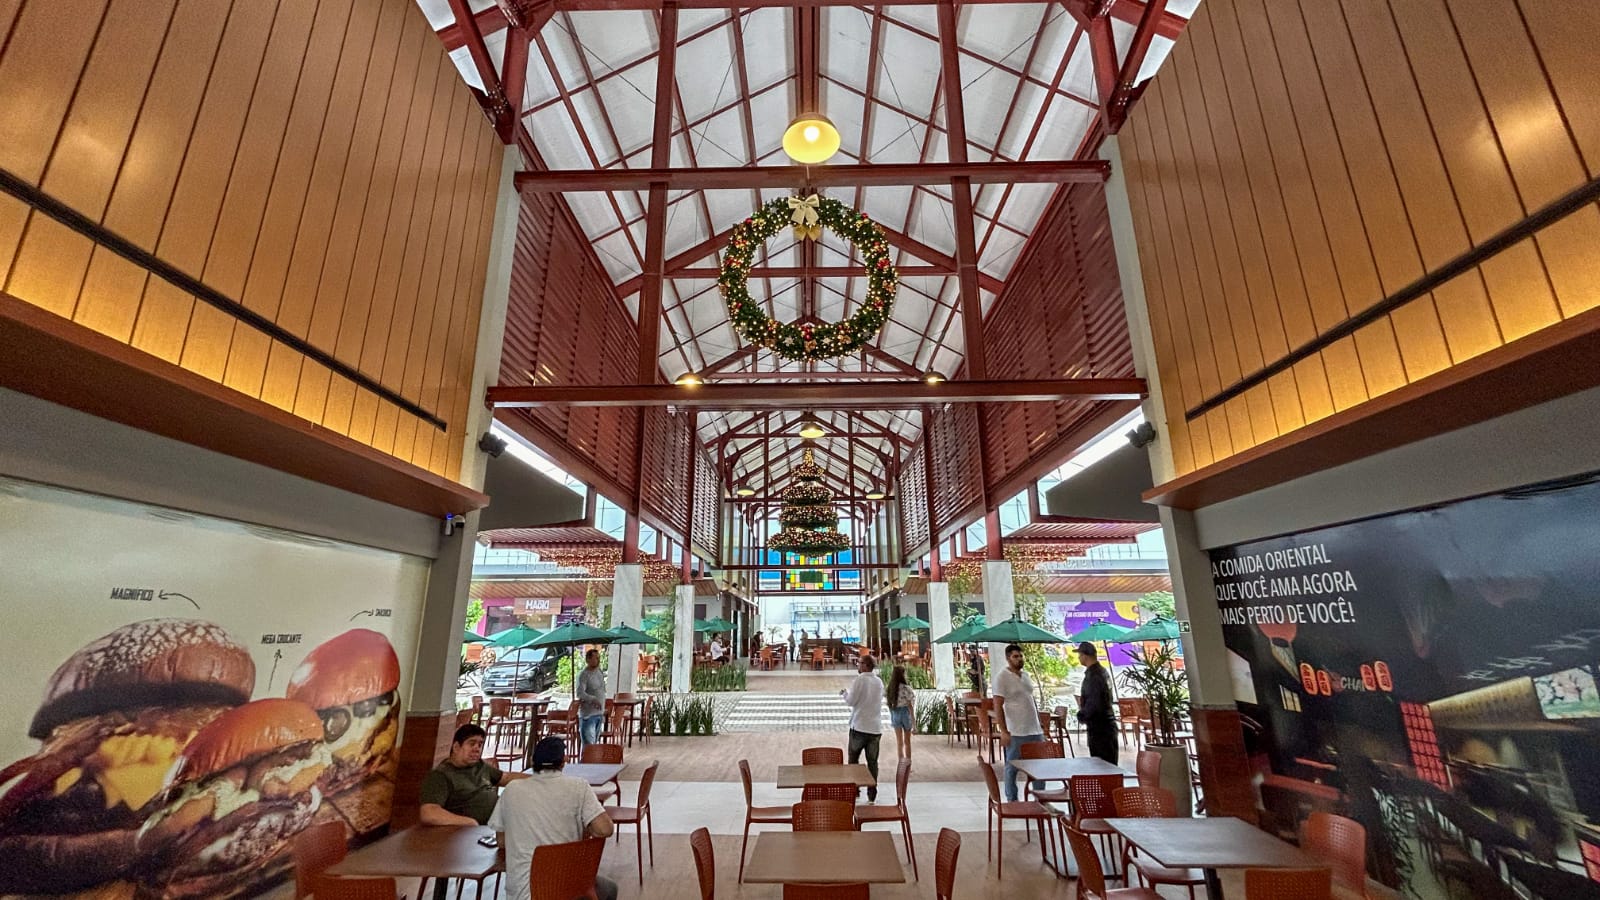 The largest open-air shopping mall in Manaus is expected to generate R0 million in the economy